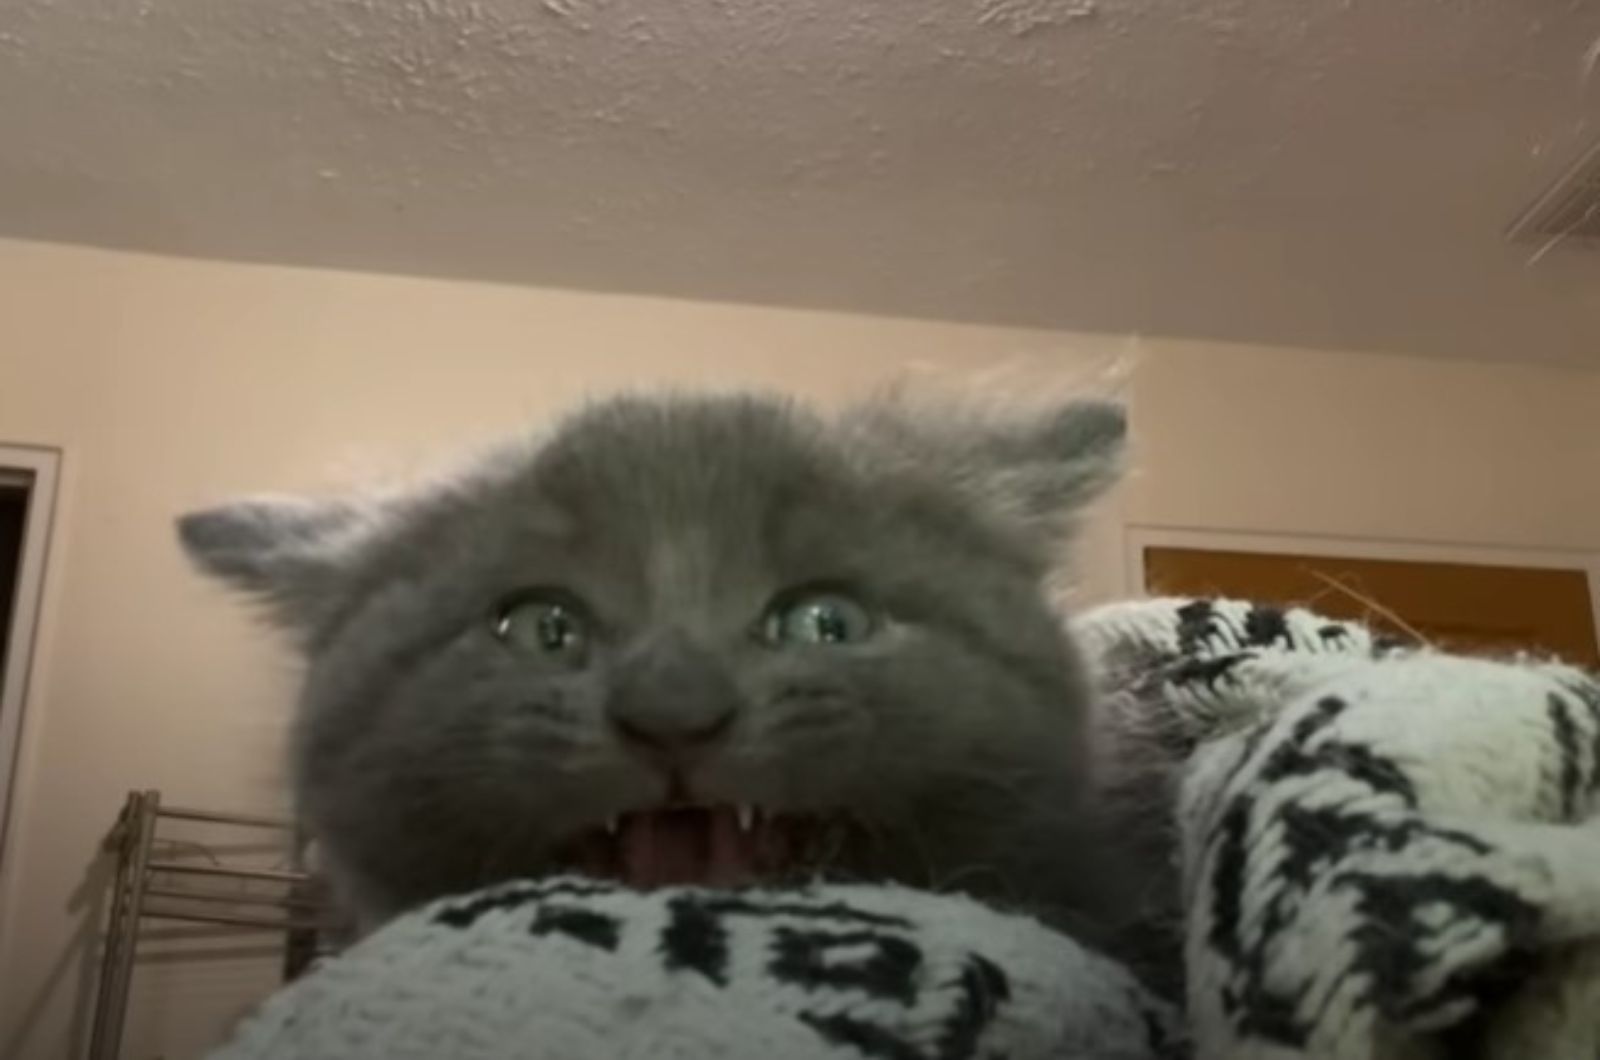 close-up photo of scared kitten